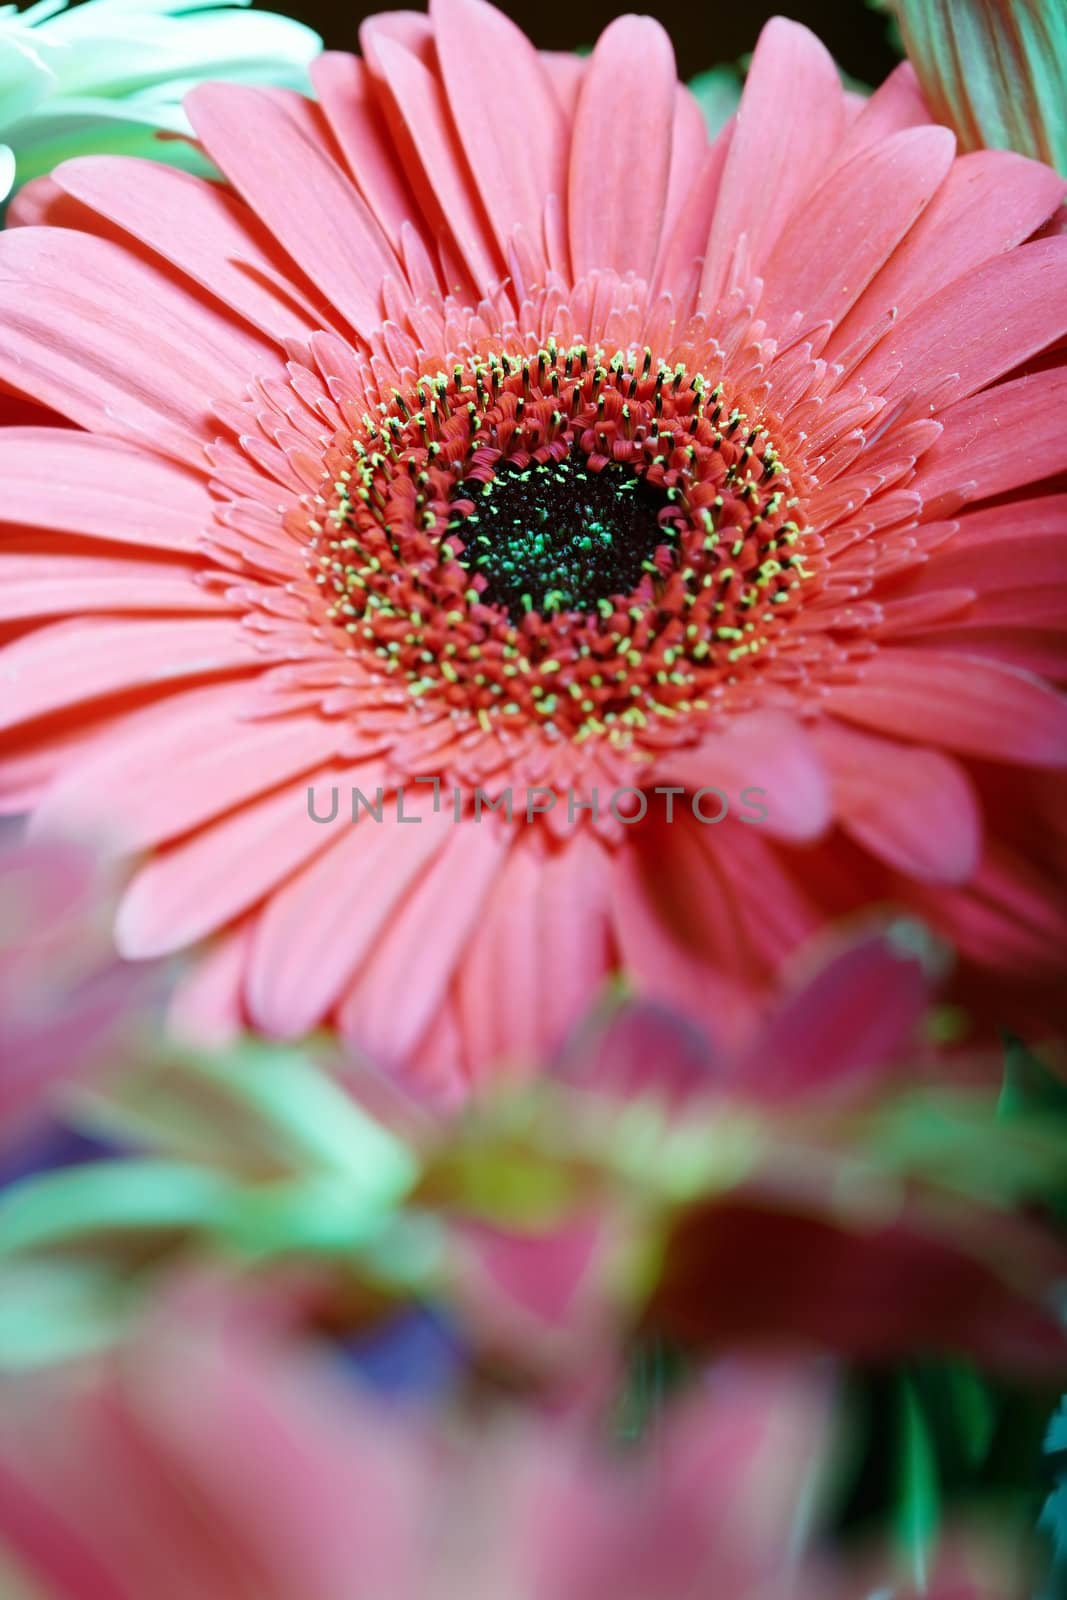 Close-up photo of the red chrysanthemum. Natural light and colors